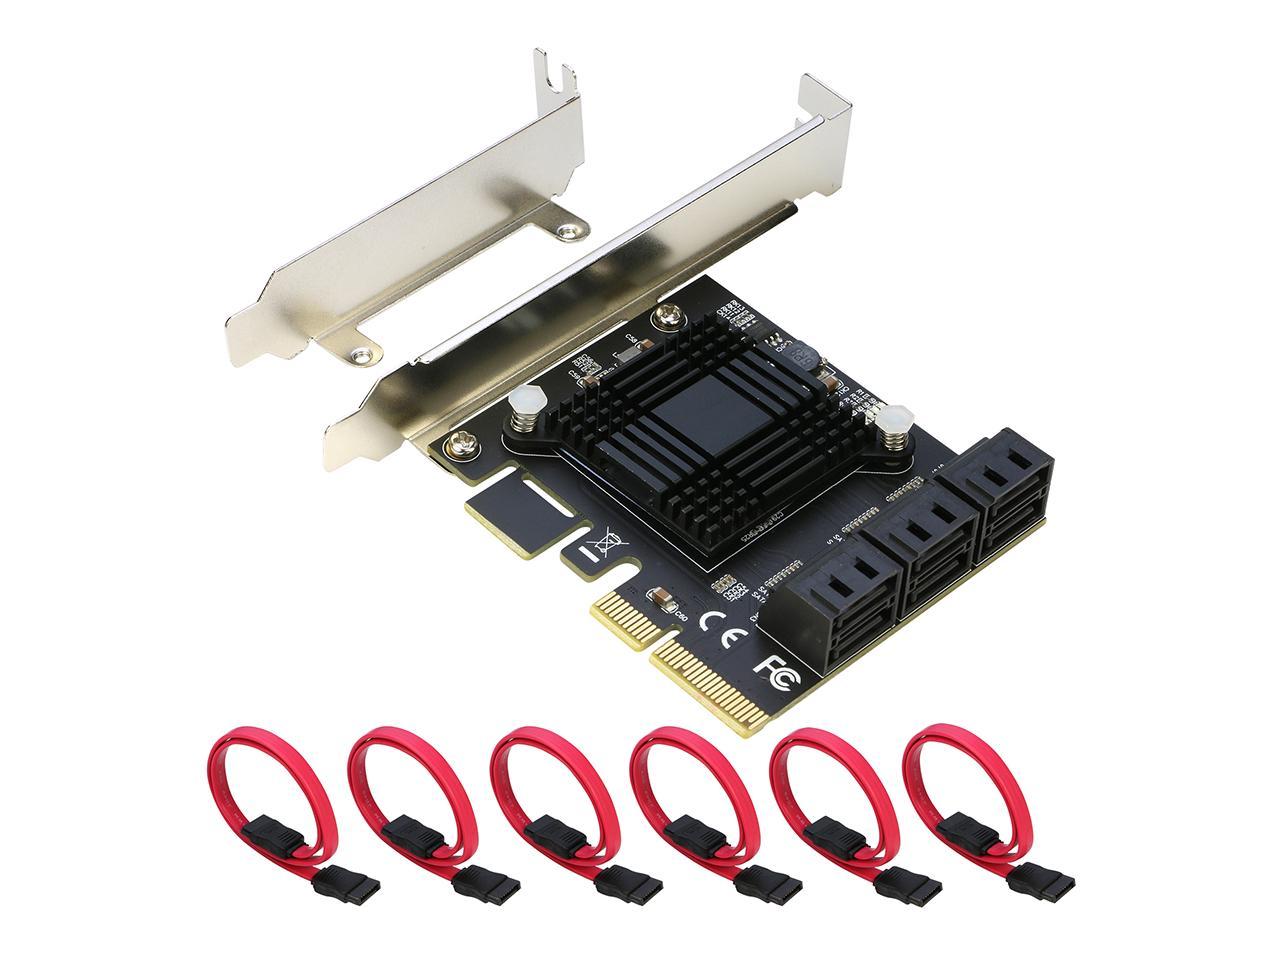 JMT PCI-E PCI Express to 6 Ports SATA3.0 SATA 3 III 6Gbps Controller Expansion Card Adapter w Low Profile Bracket for SSD HDD IPFS 